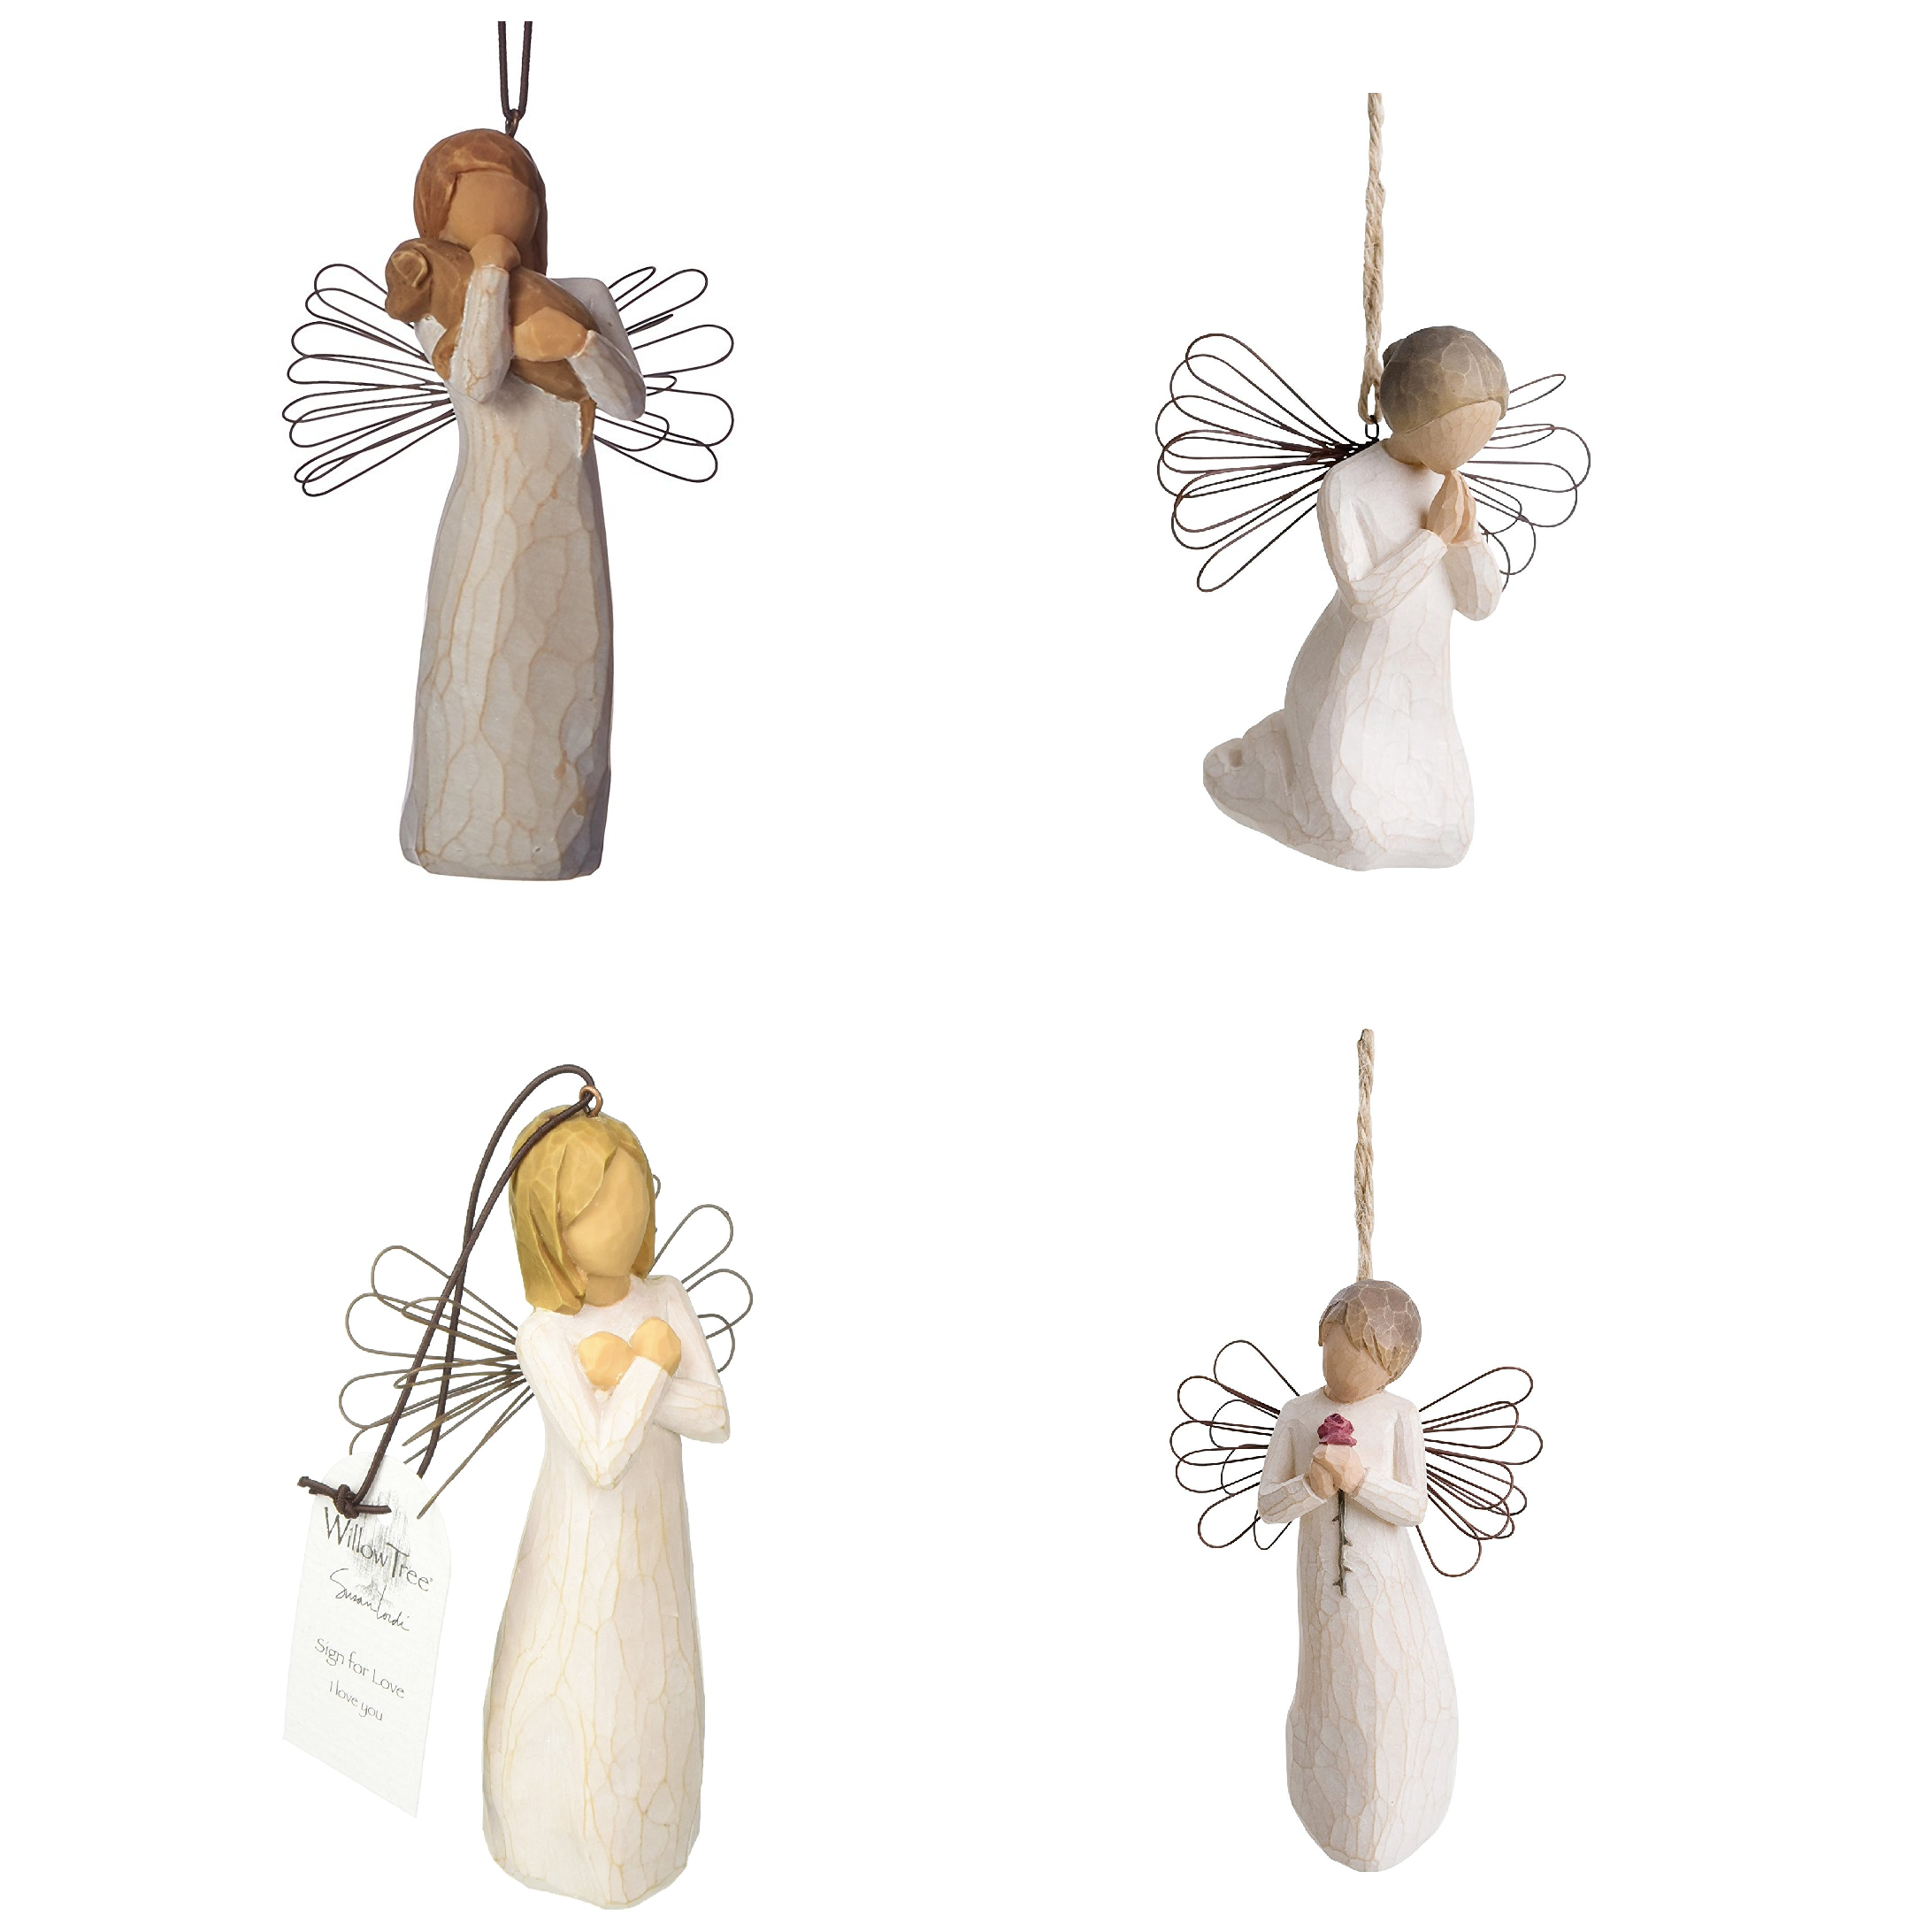 Amazon: Willow Tree Christmas Ornaments – Great Friendship Gifts!